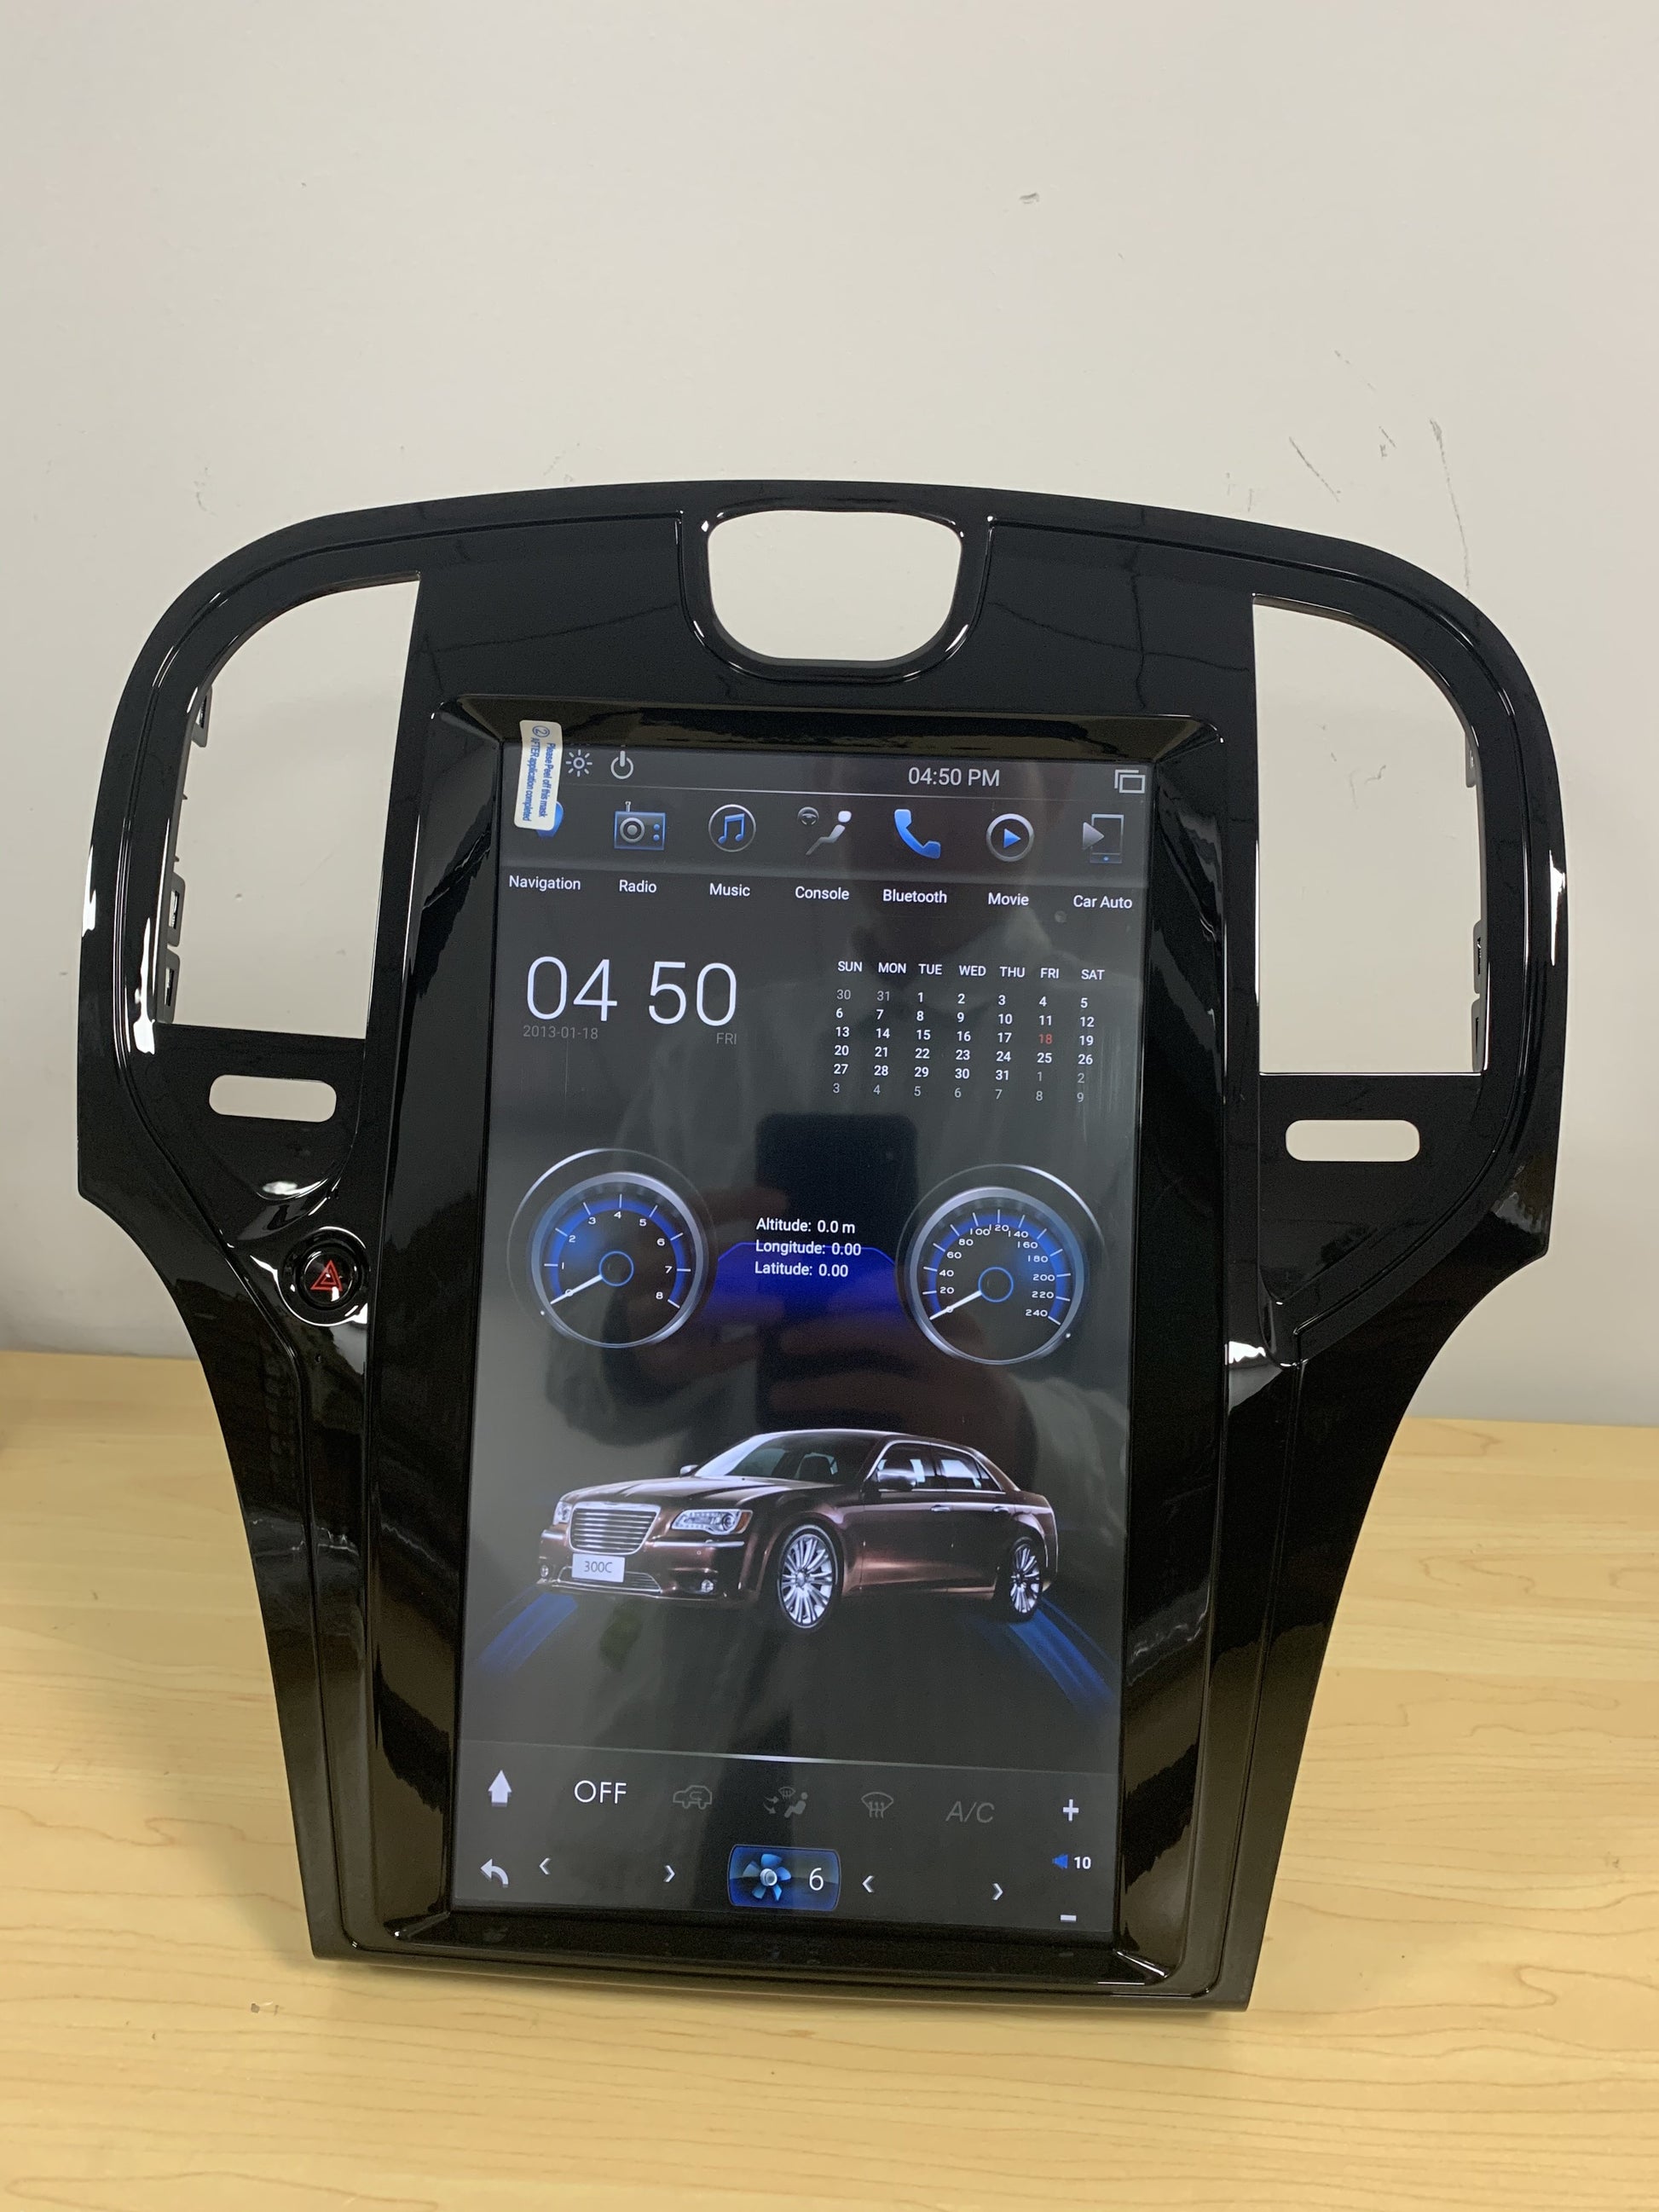 [Open box] [ PX6 SIX-CORE ] 13.3" Vertical Screen Android 9.0 Navigation Radio for Chrysler 300C 2013-2019